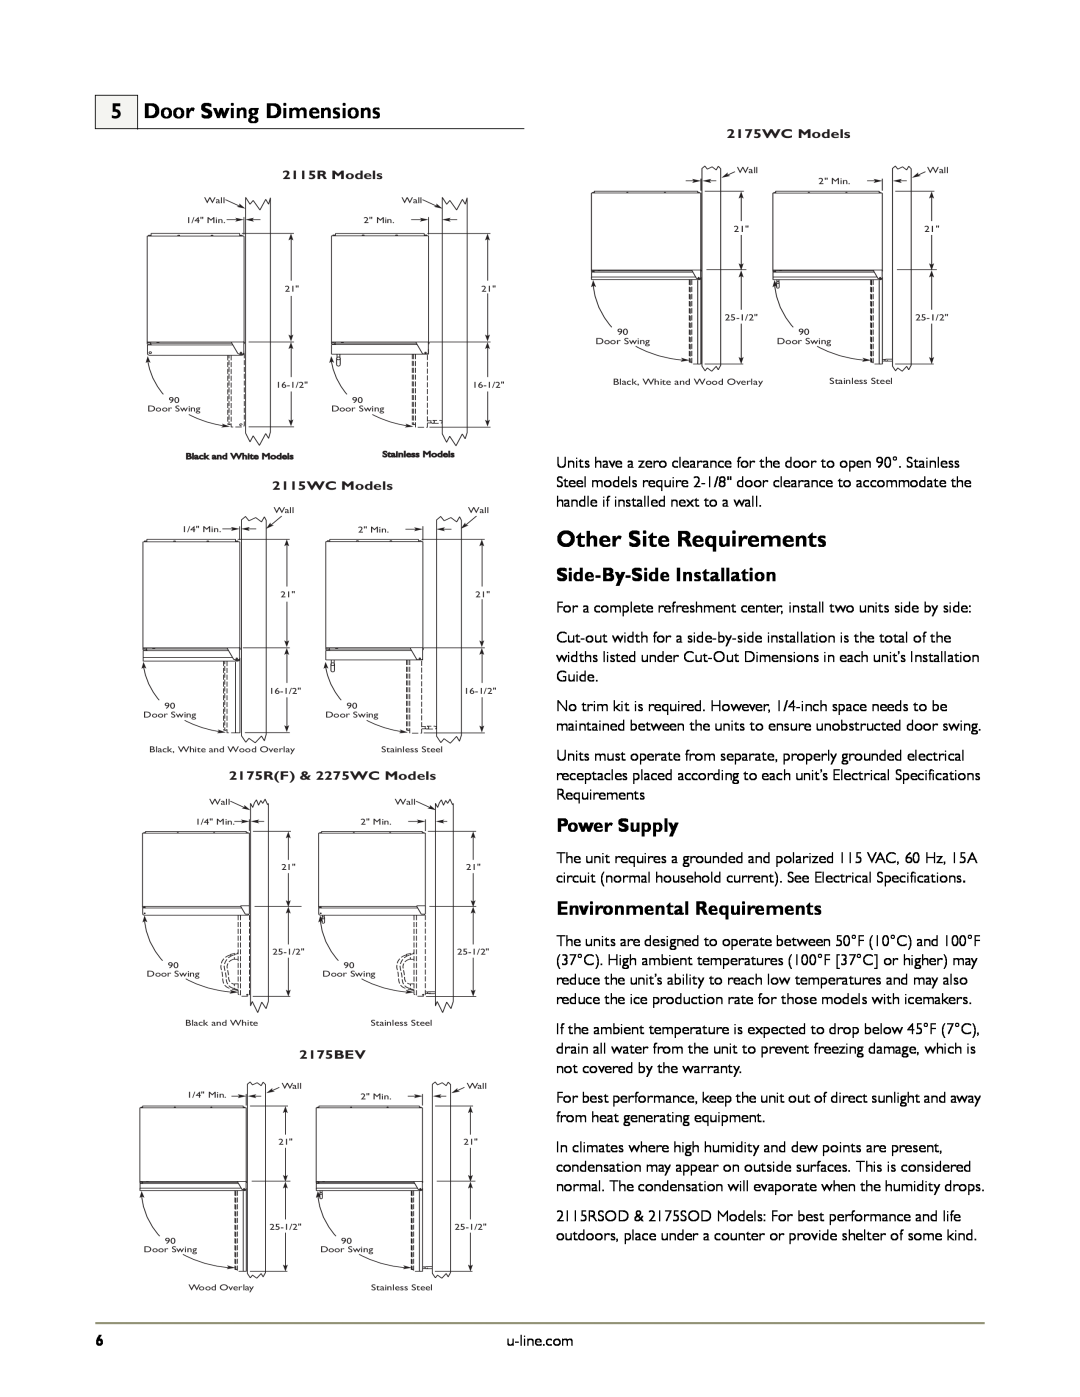 U-Line U-2175RCW-00, U-2175RCS-01 Other Site Requirements, Door Swing Dimensions, Side-By-Side Installation, Power Supply 